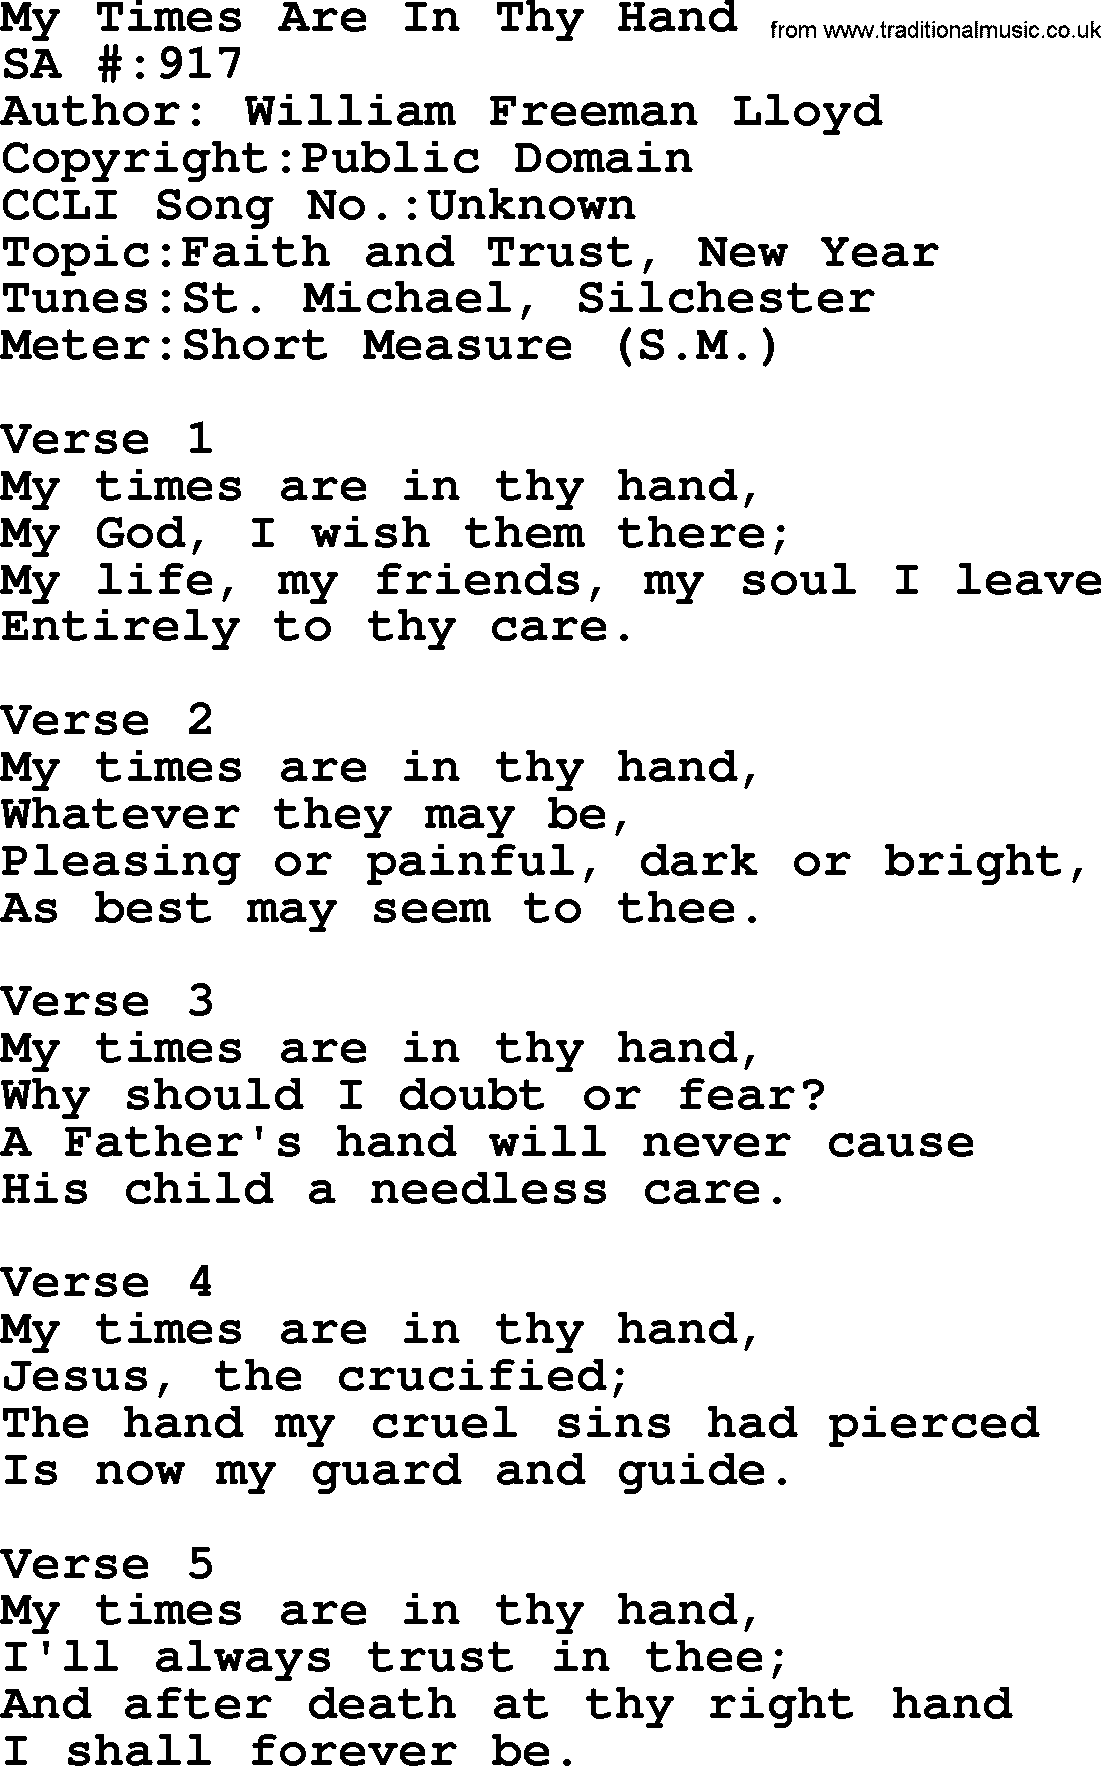 Salvation Army Hymnal, title: My Times Are In Thy Hand, with lyrics and PDF,